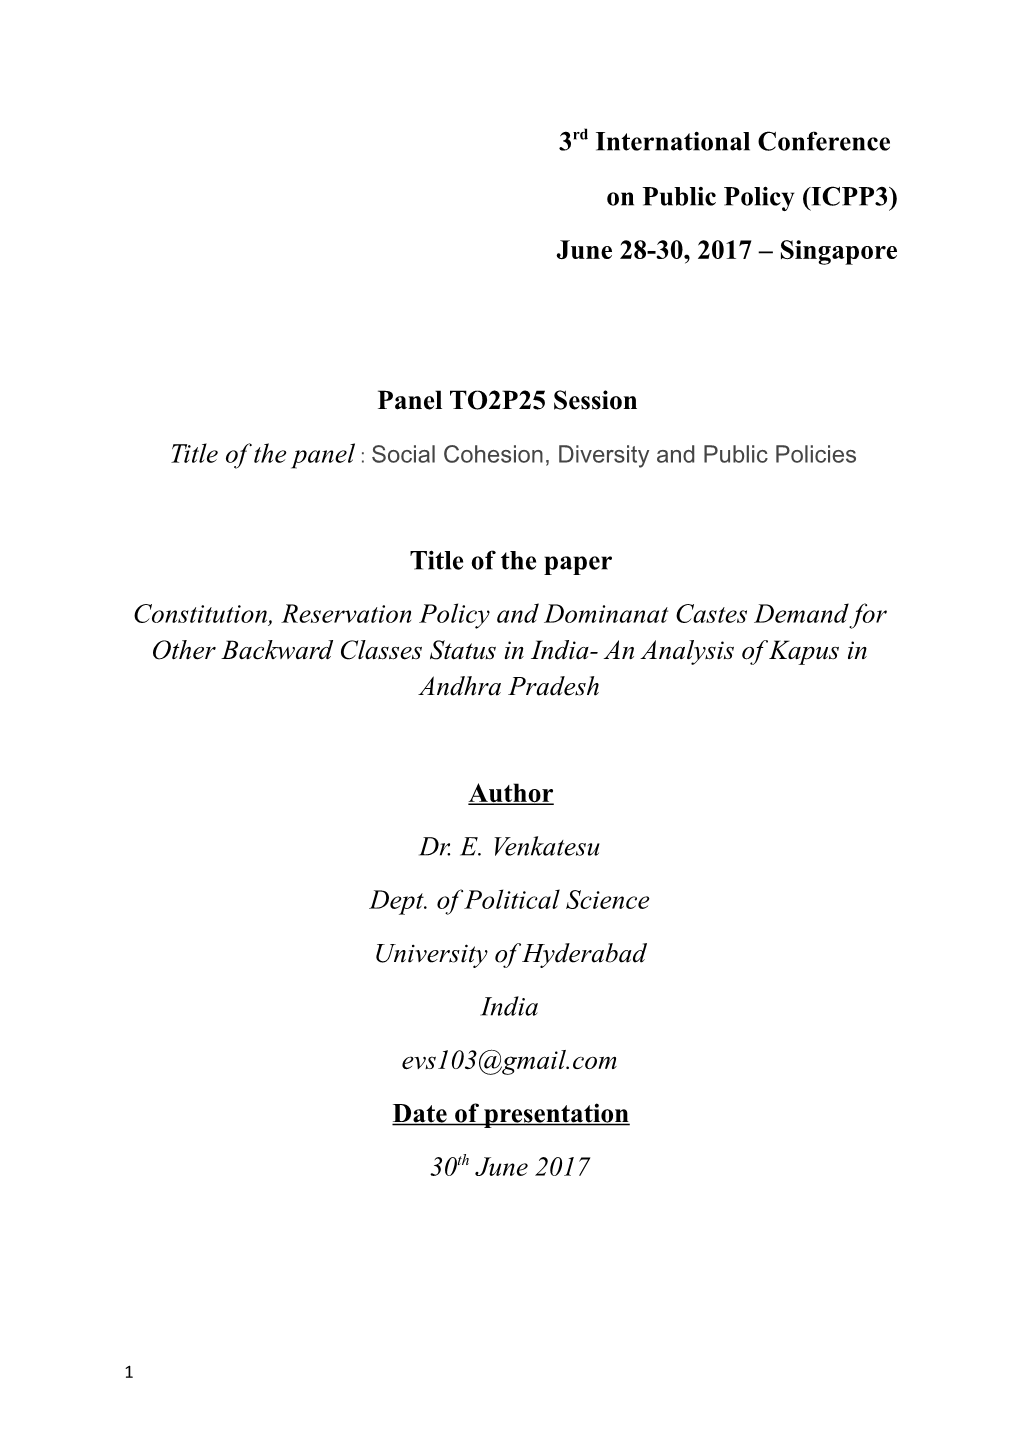 June 28-30, 2017 – Singapore Panel TO2P25 Session Title of the Paper